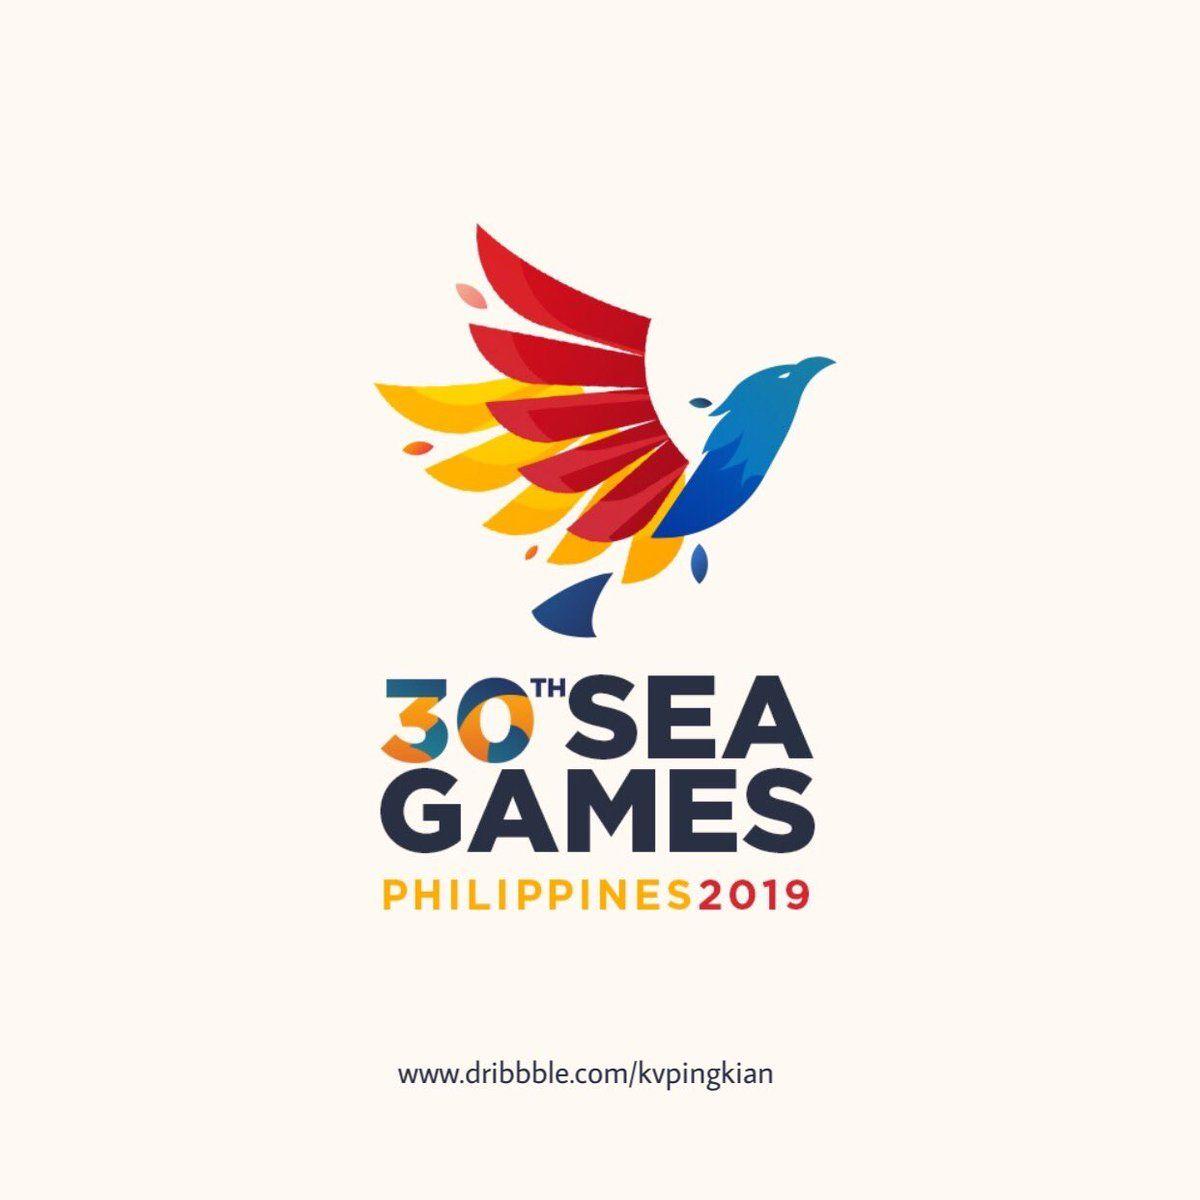 Phillippines Logo - Philippine eagle shines as netizens redesign 2019 SEA Games logo